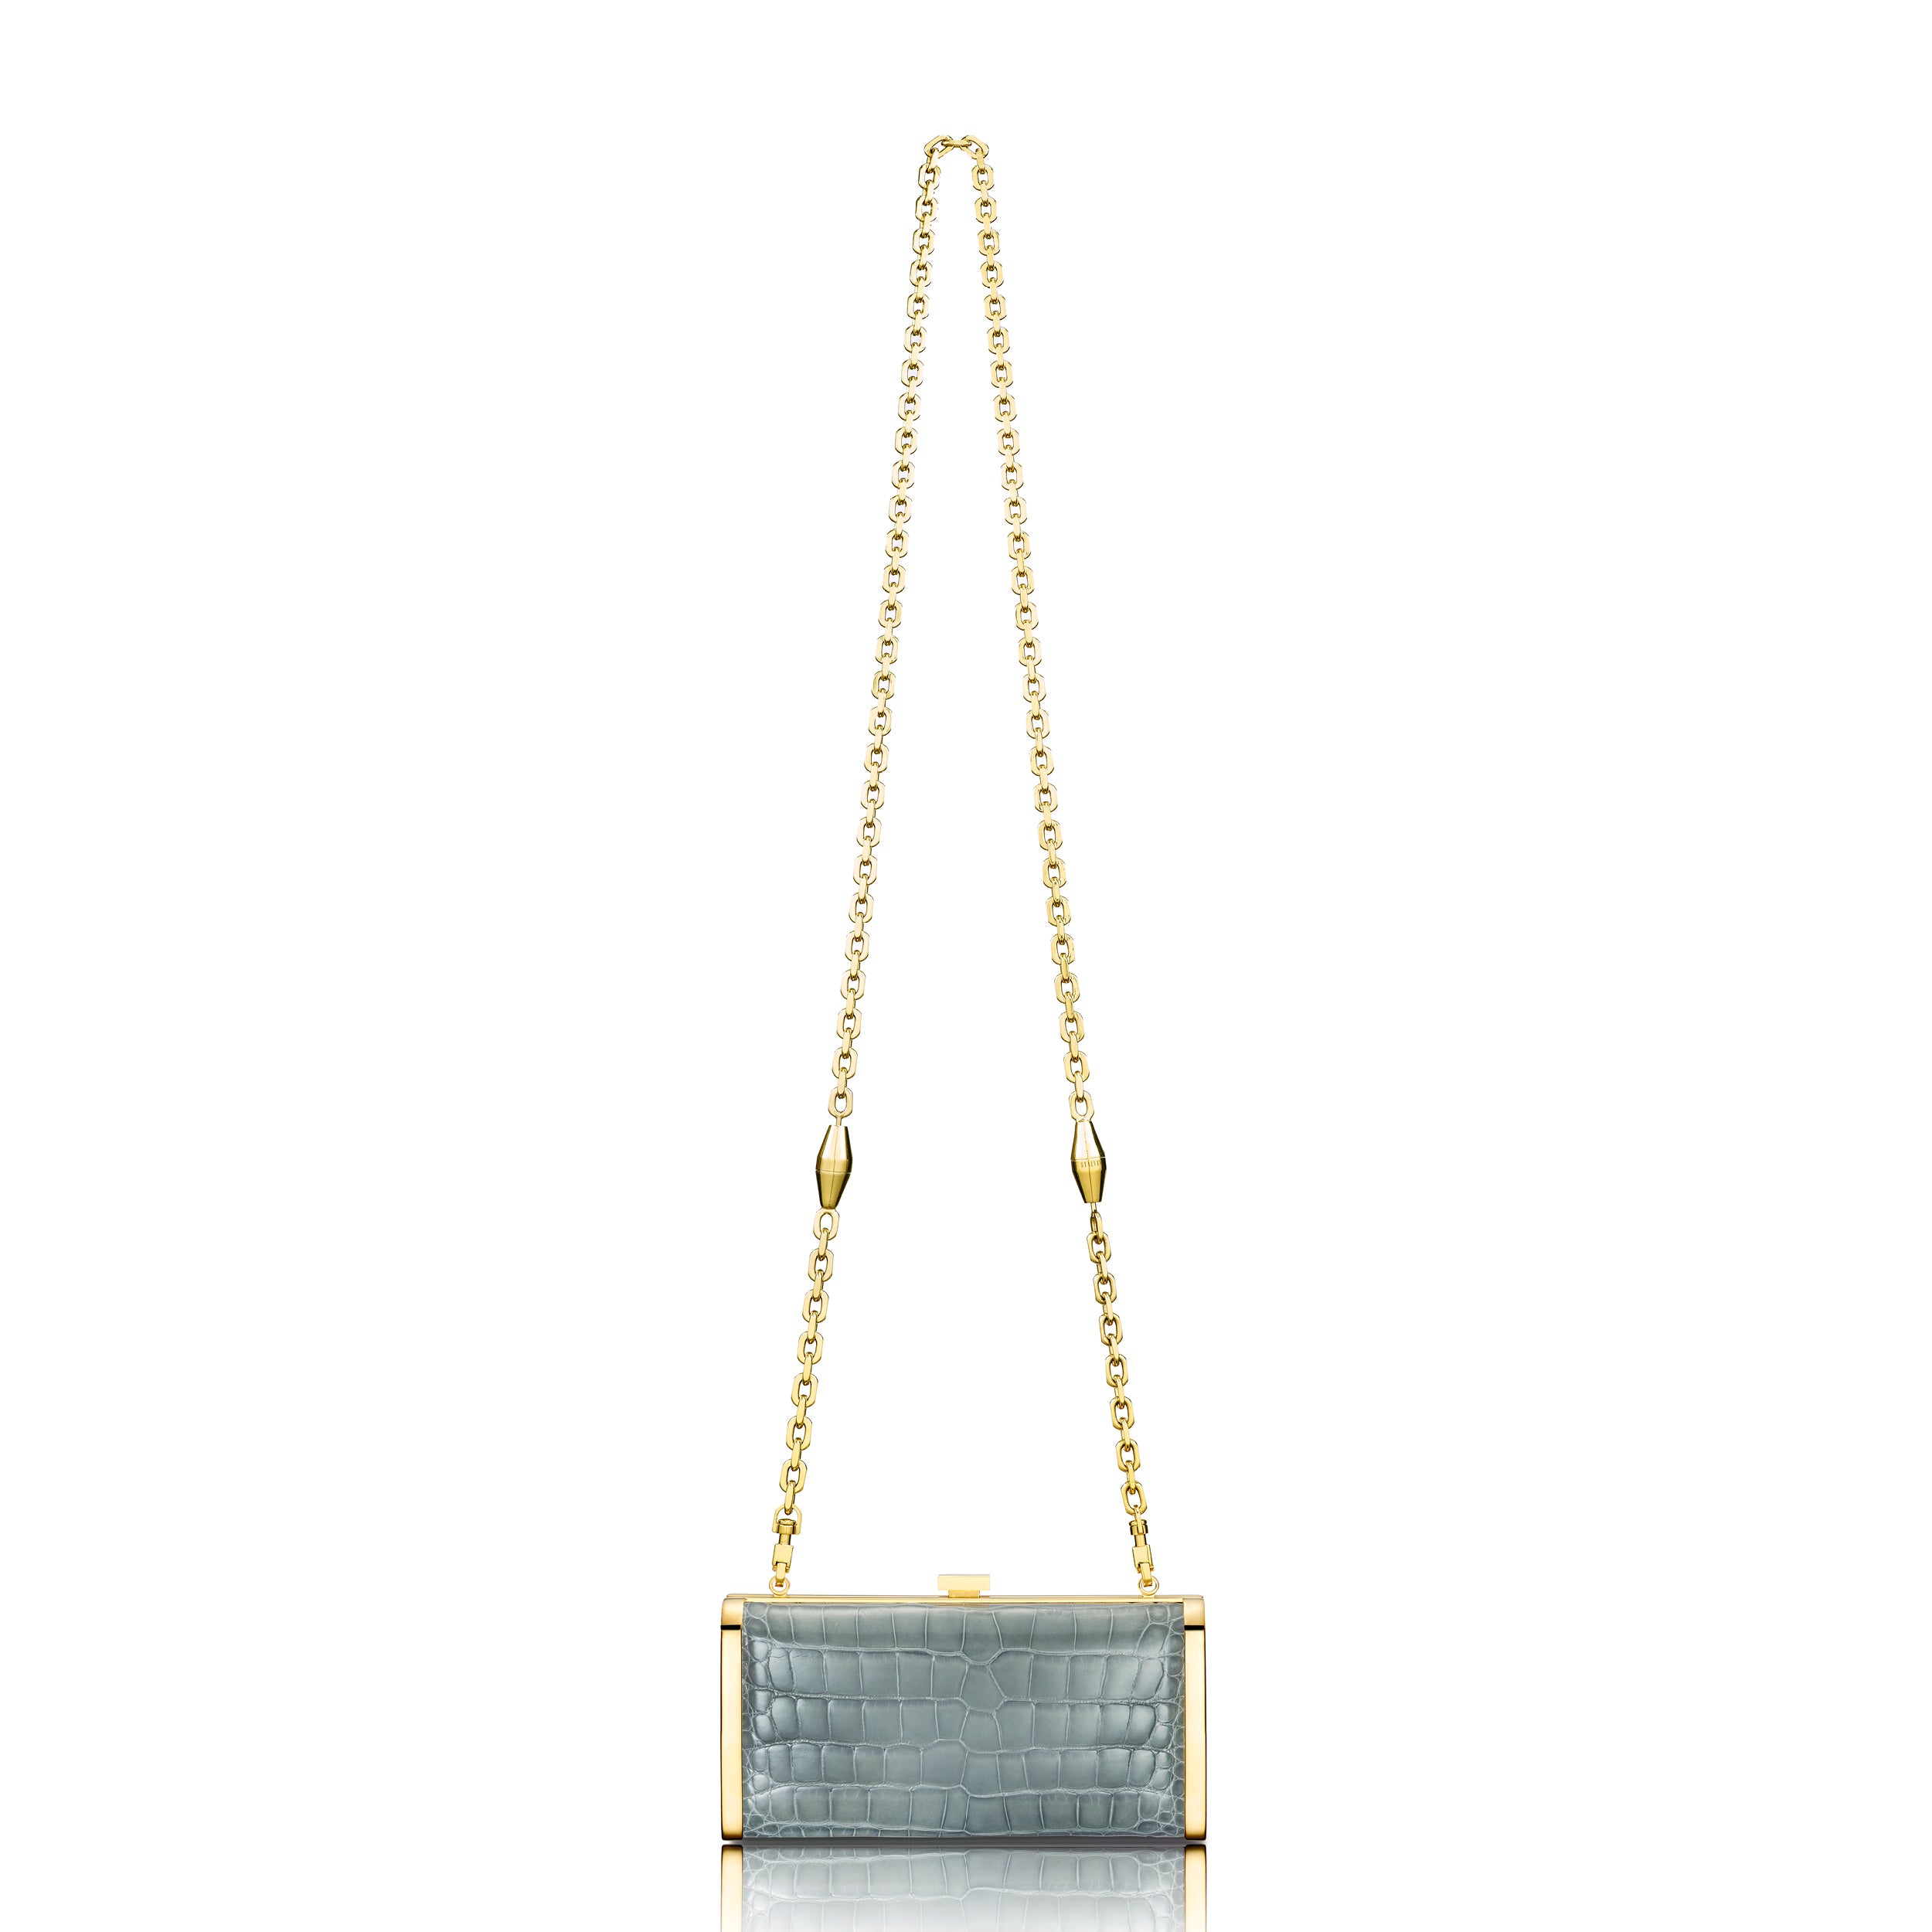 STALVEY Square Clutch in Gunmetal Alligator with 24kt Gold Hardware Front View with Chain